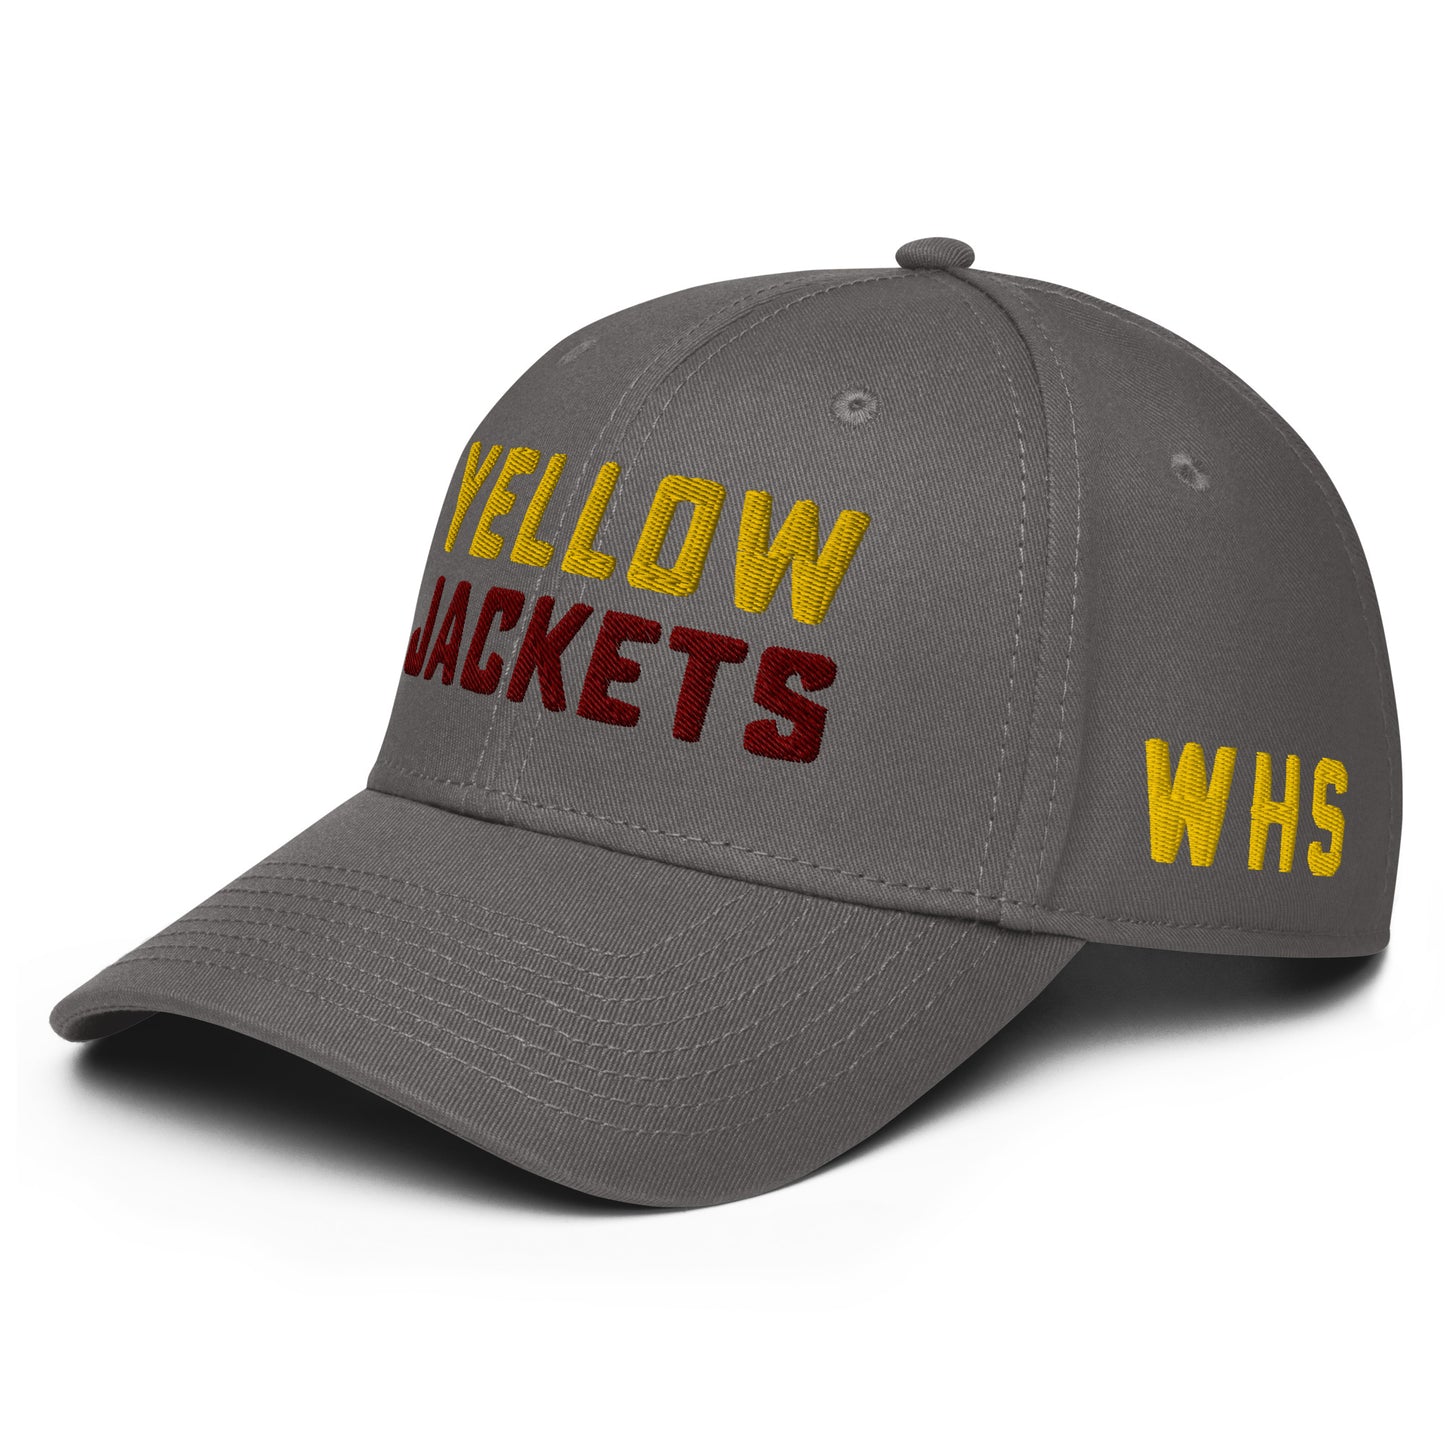 YELLOWJACKETS_WHS_embroidery-Structured baseball cap